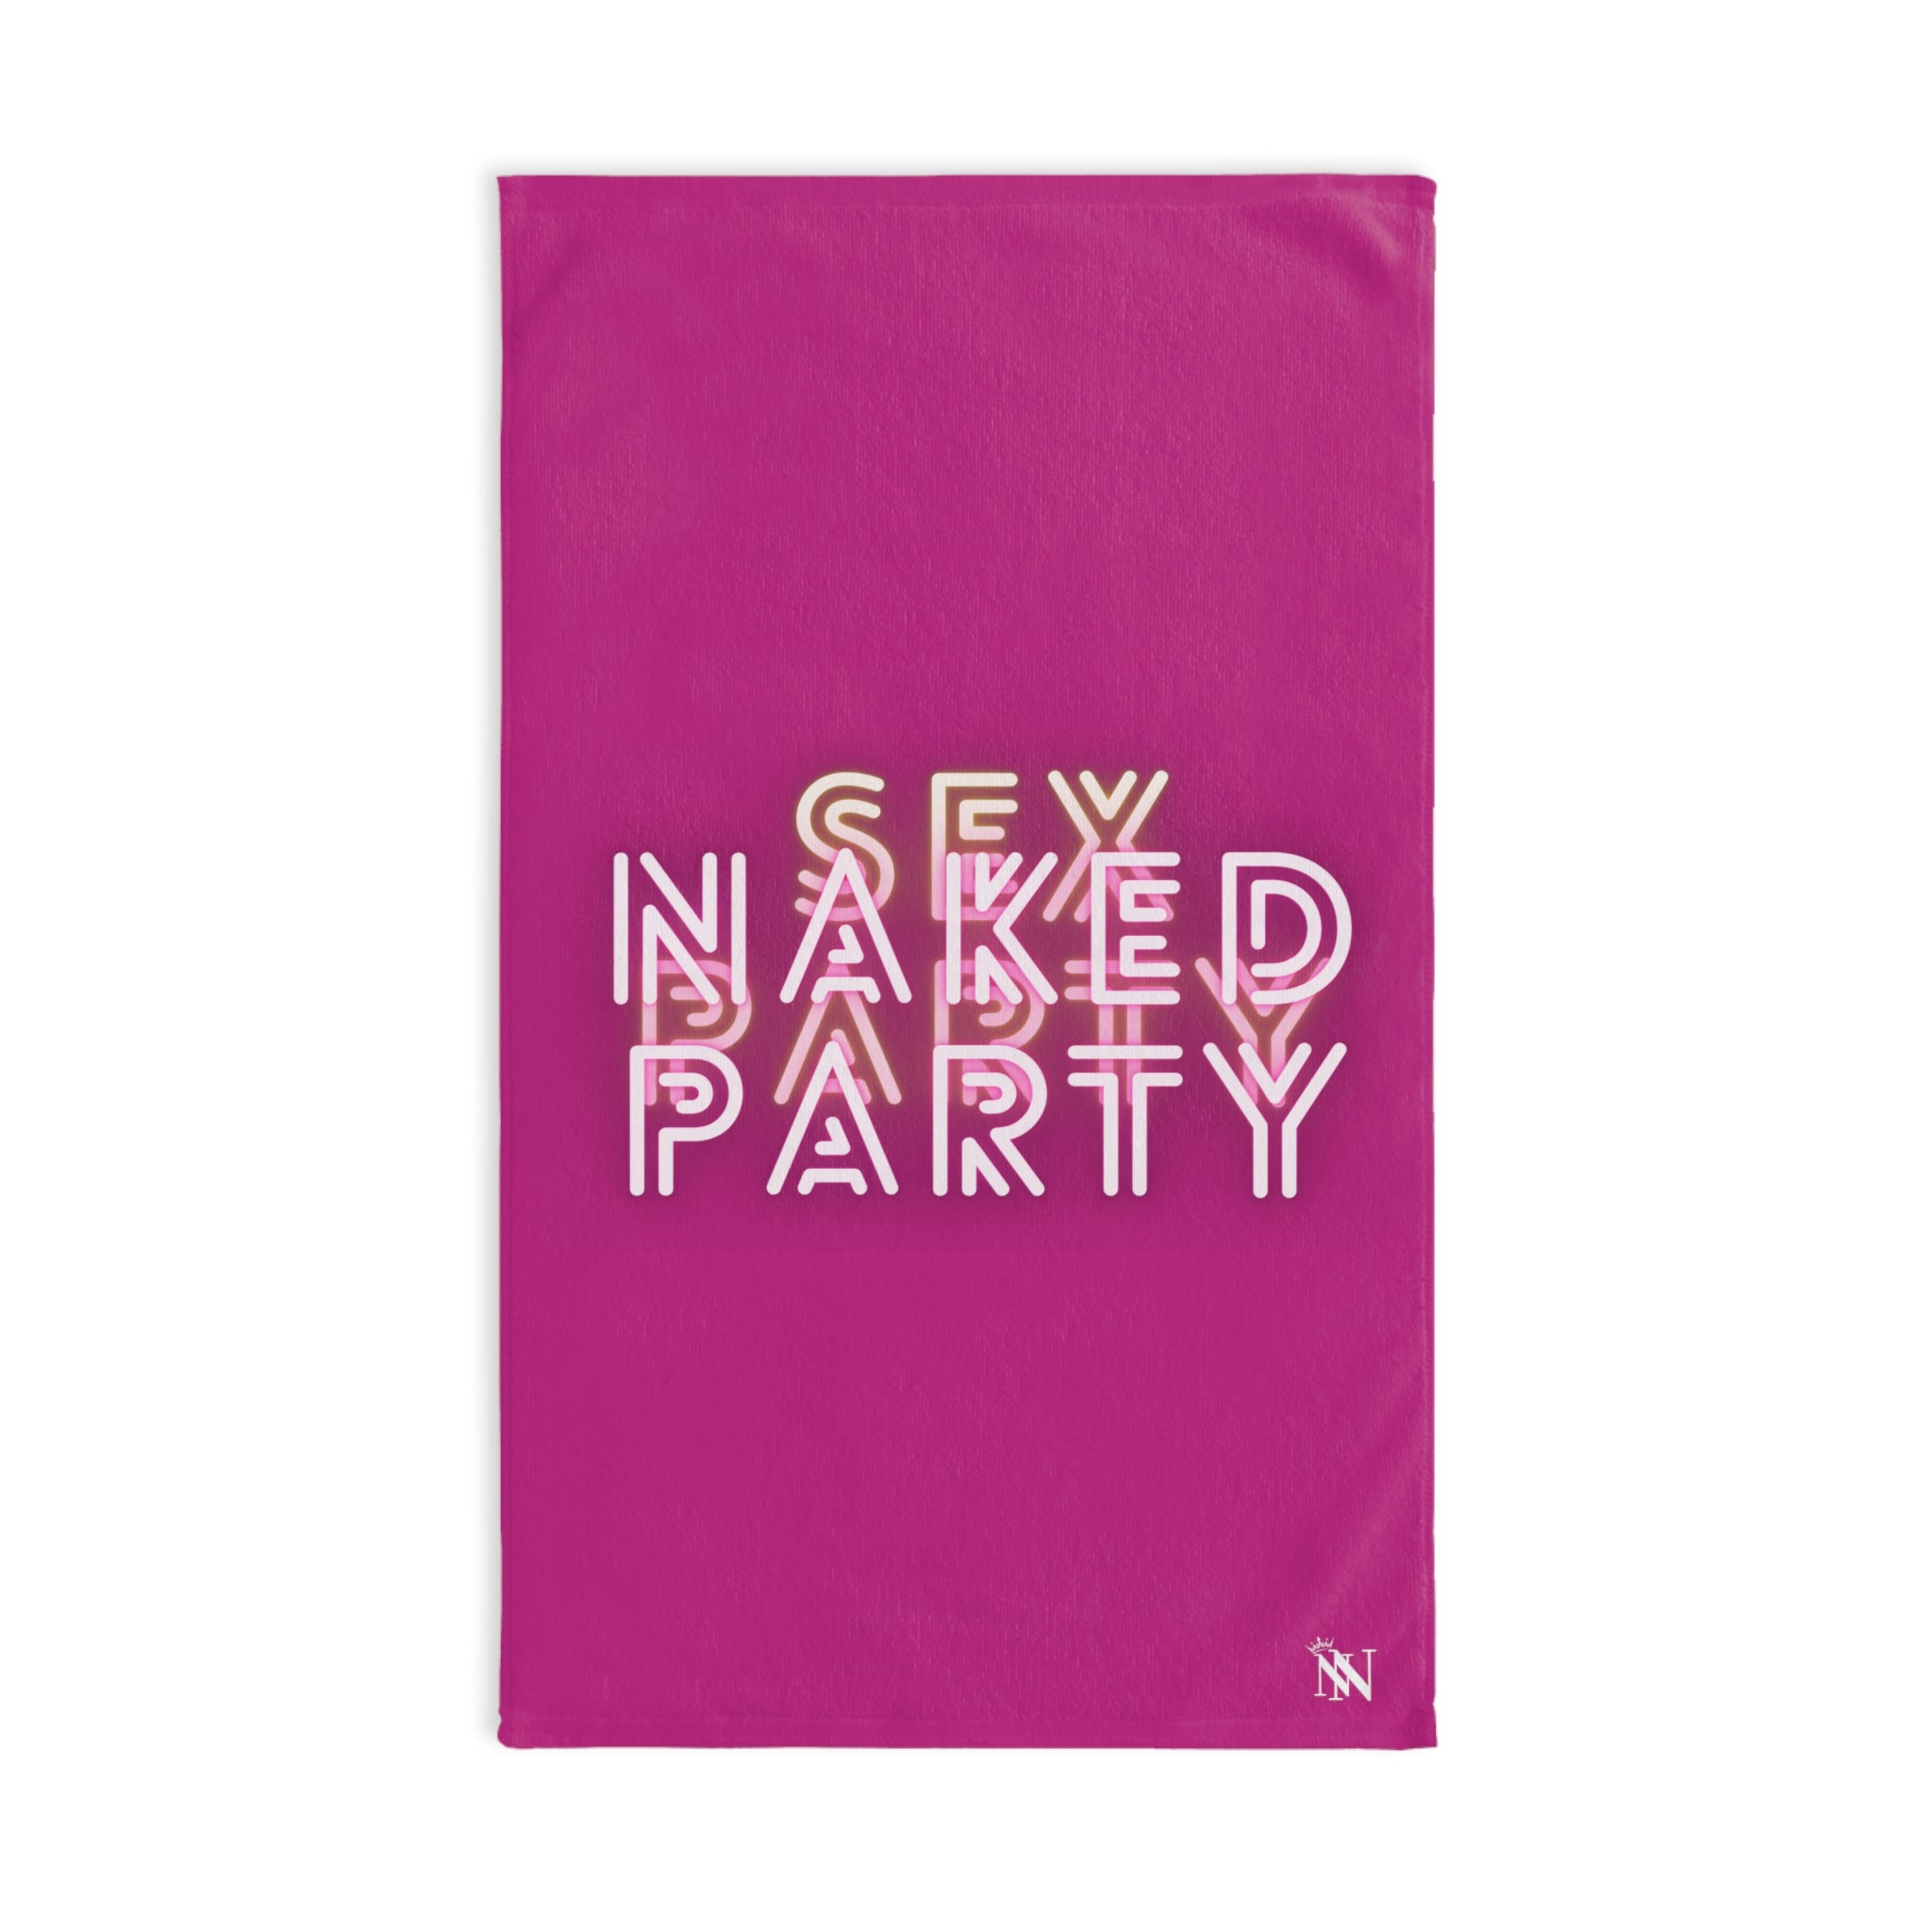 Naked  Party Fuscia | Funny Gifts for Men - Gifts for Him - Birthday Gifts for Men, Him, Husband, Boyfriend, New Couple Gifts, Fathers & Valentines Day Gifts, Hand Towels NECTAR NAPKINS